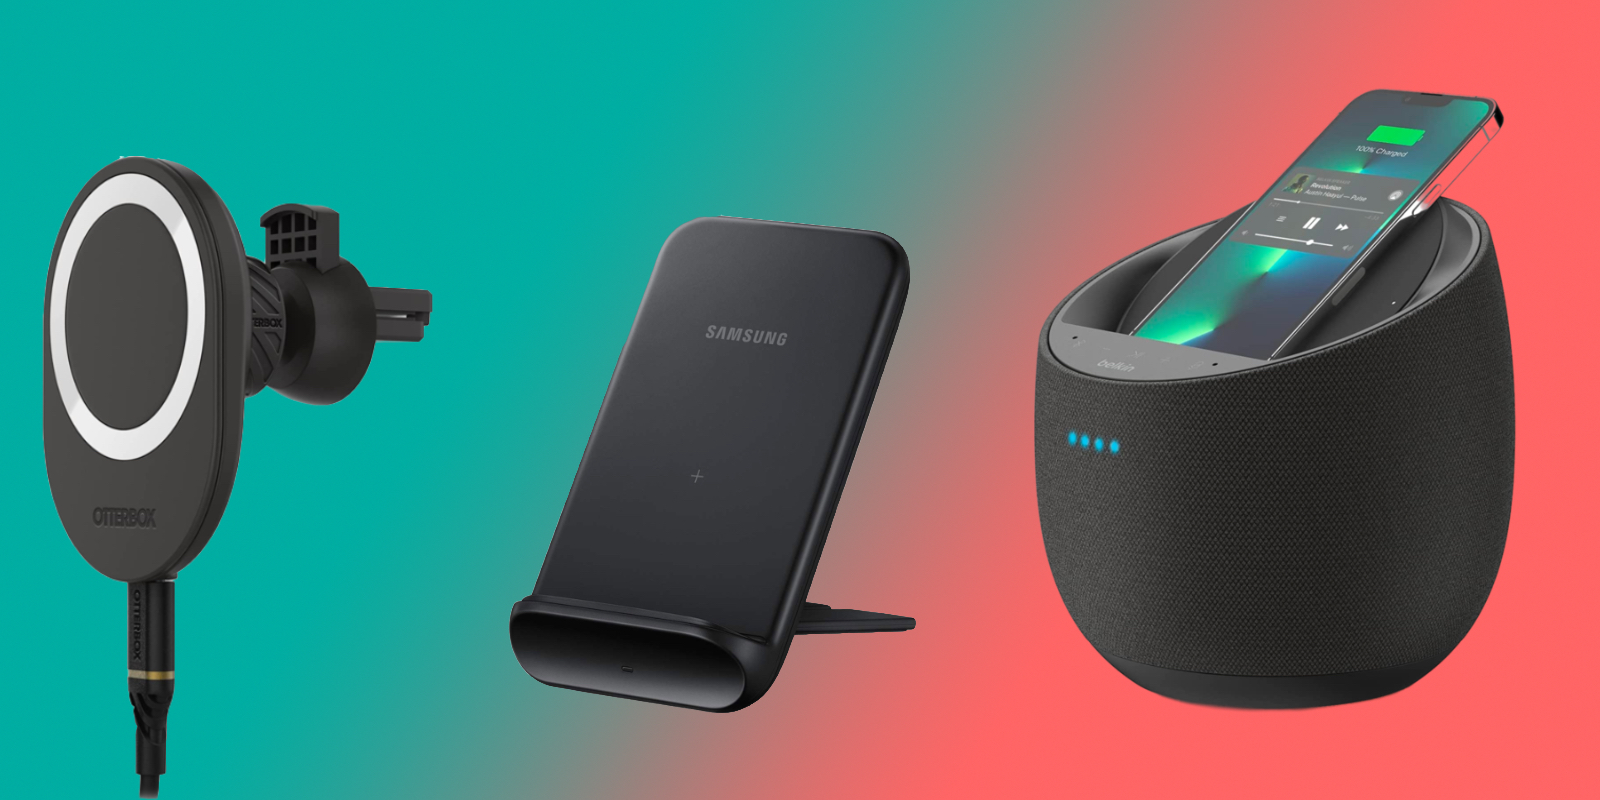 The best Amazon Prime Early Access deals on wireless chargers